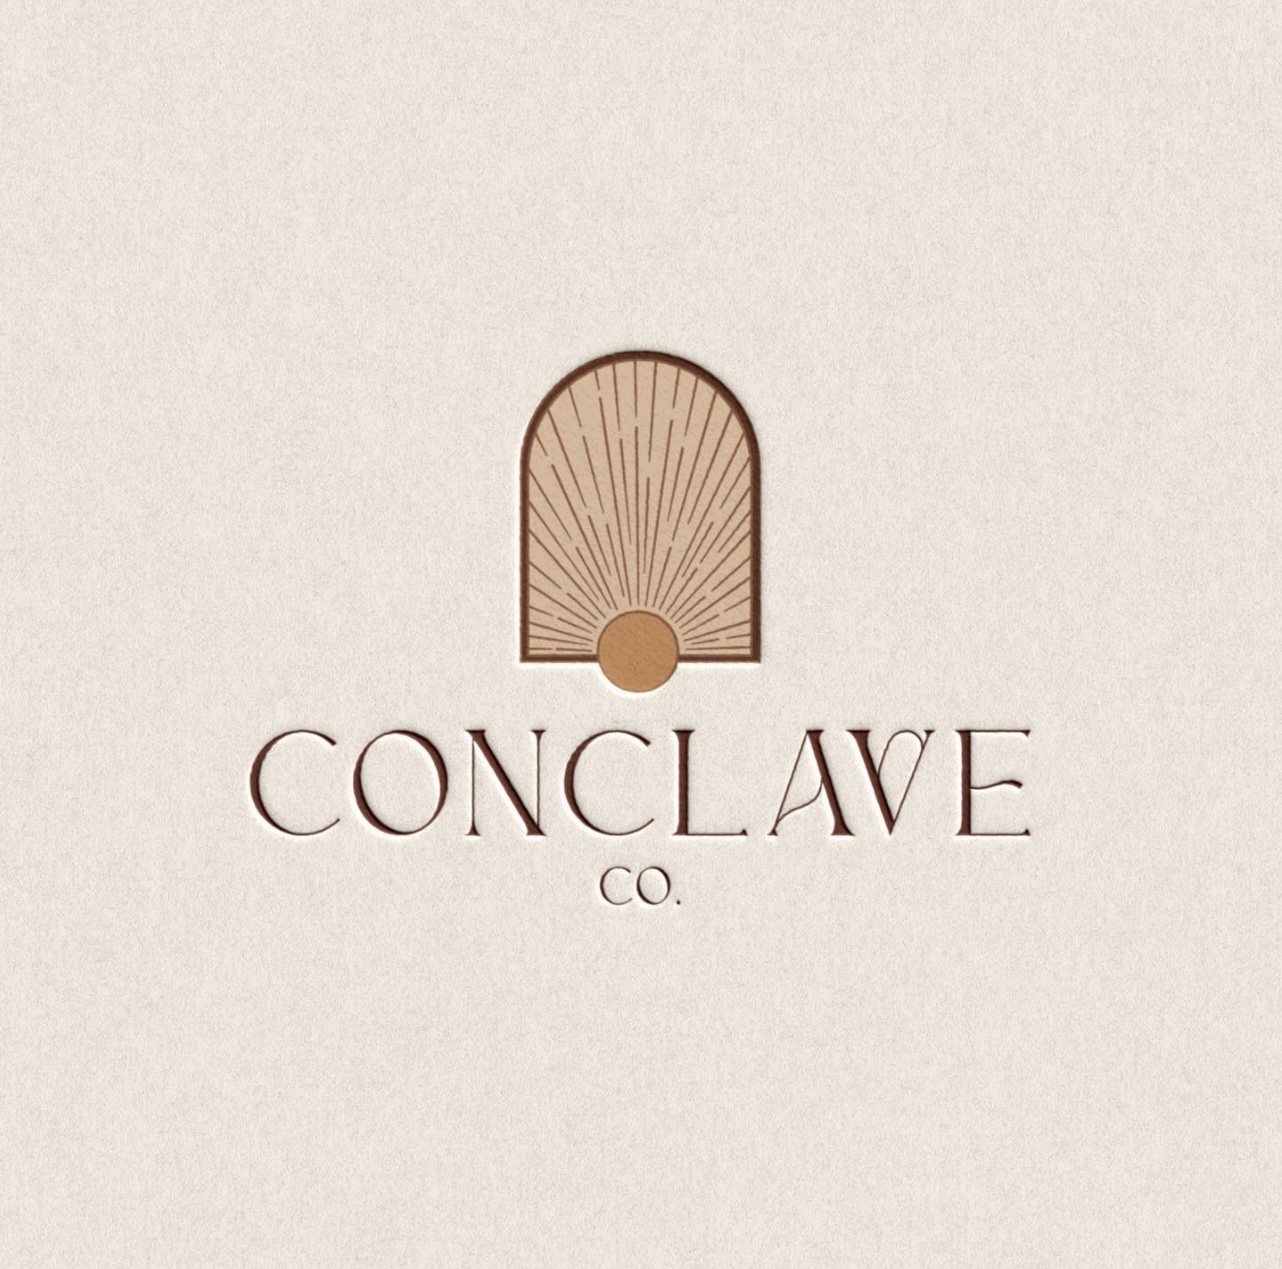 Logo for Conclave Co.